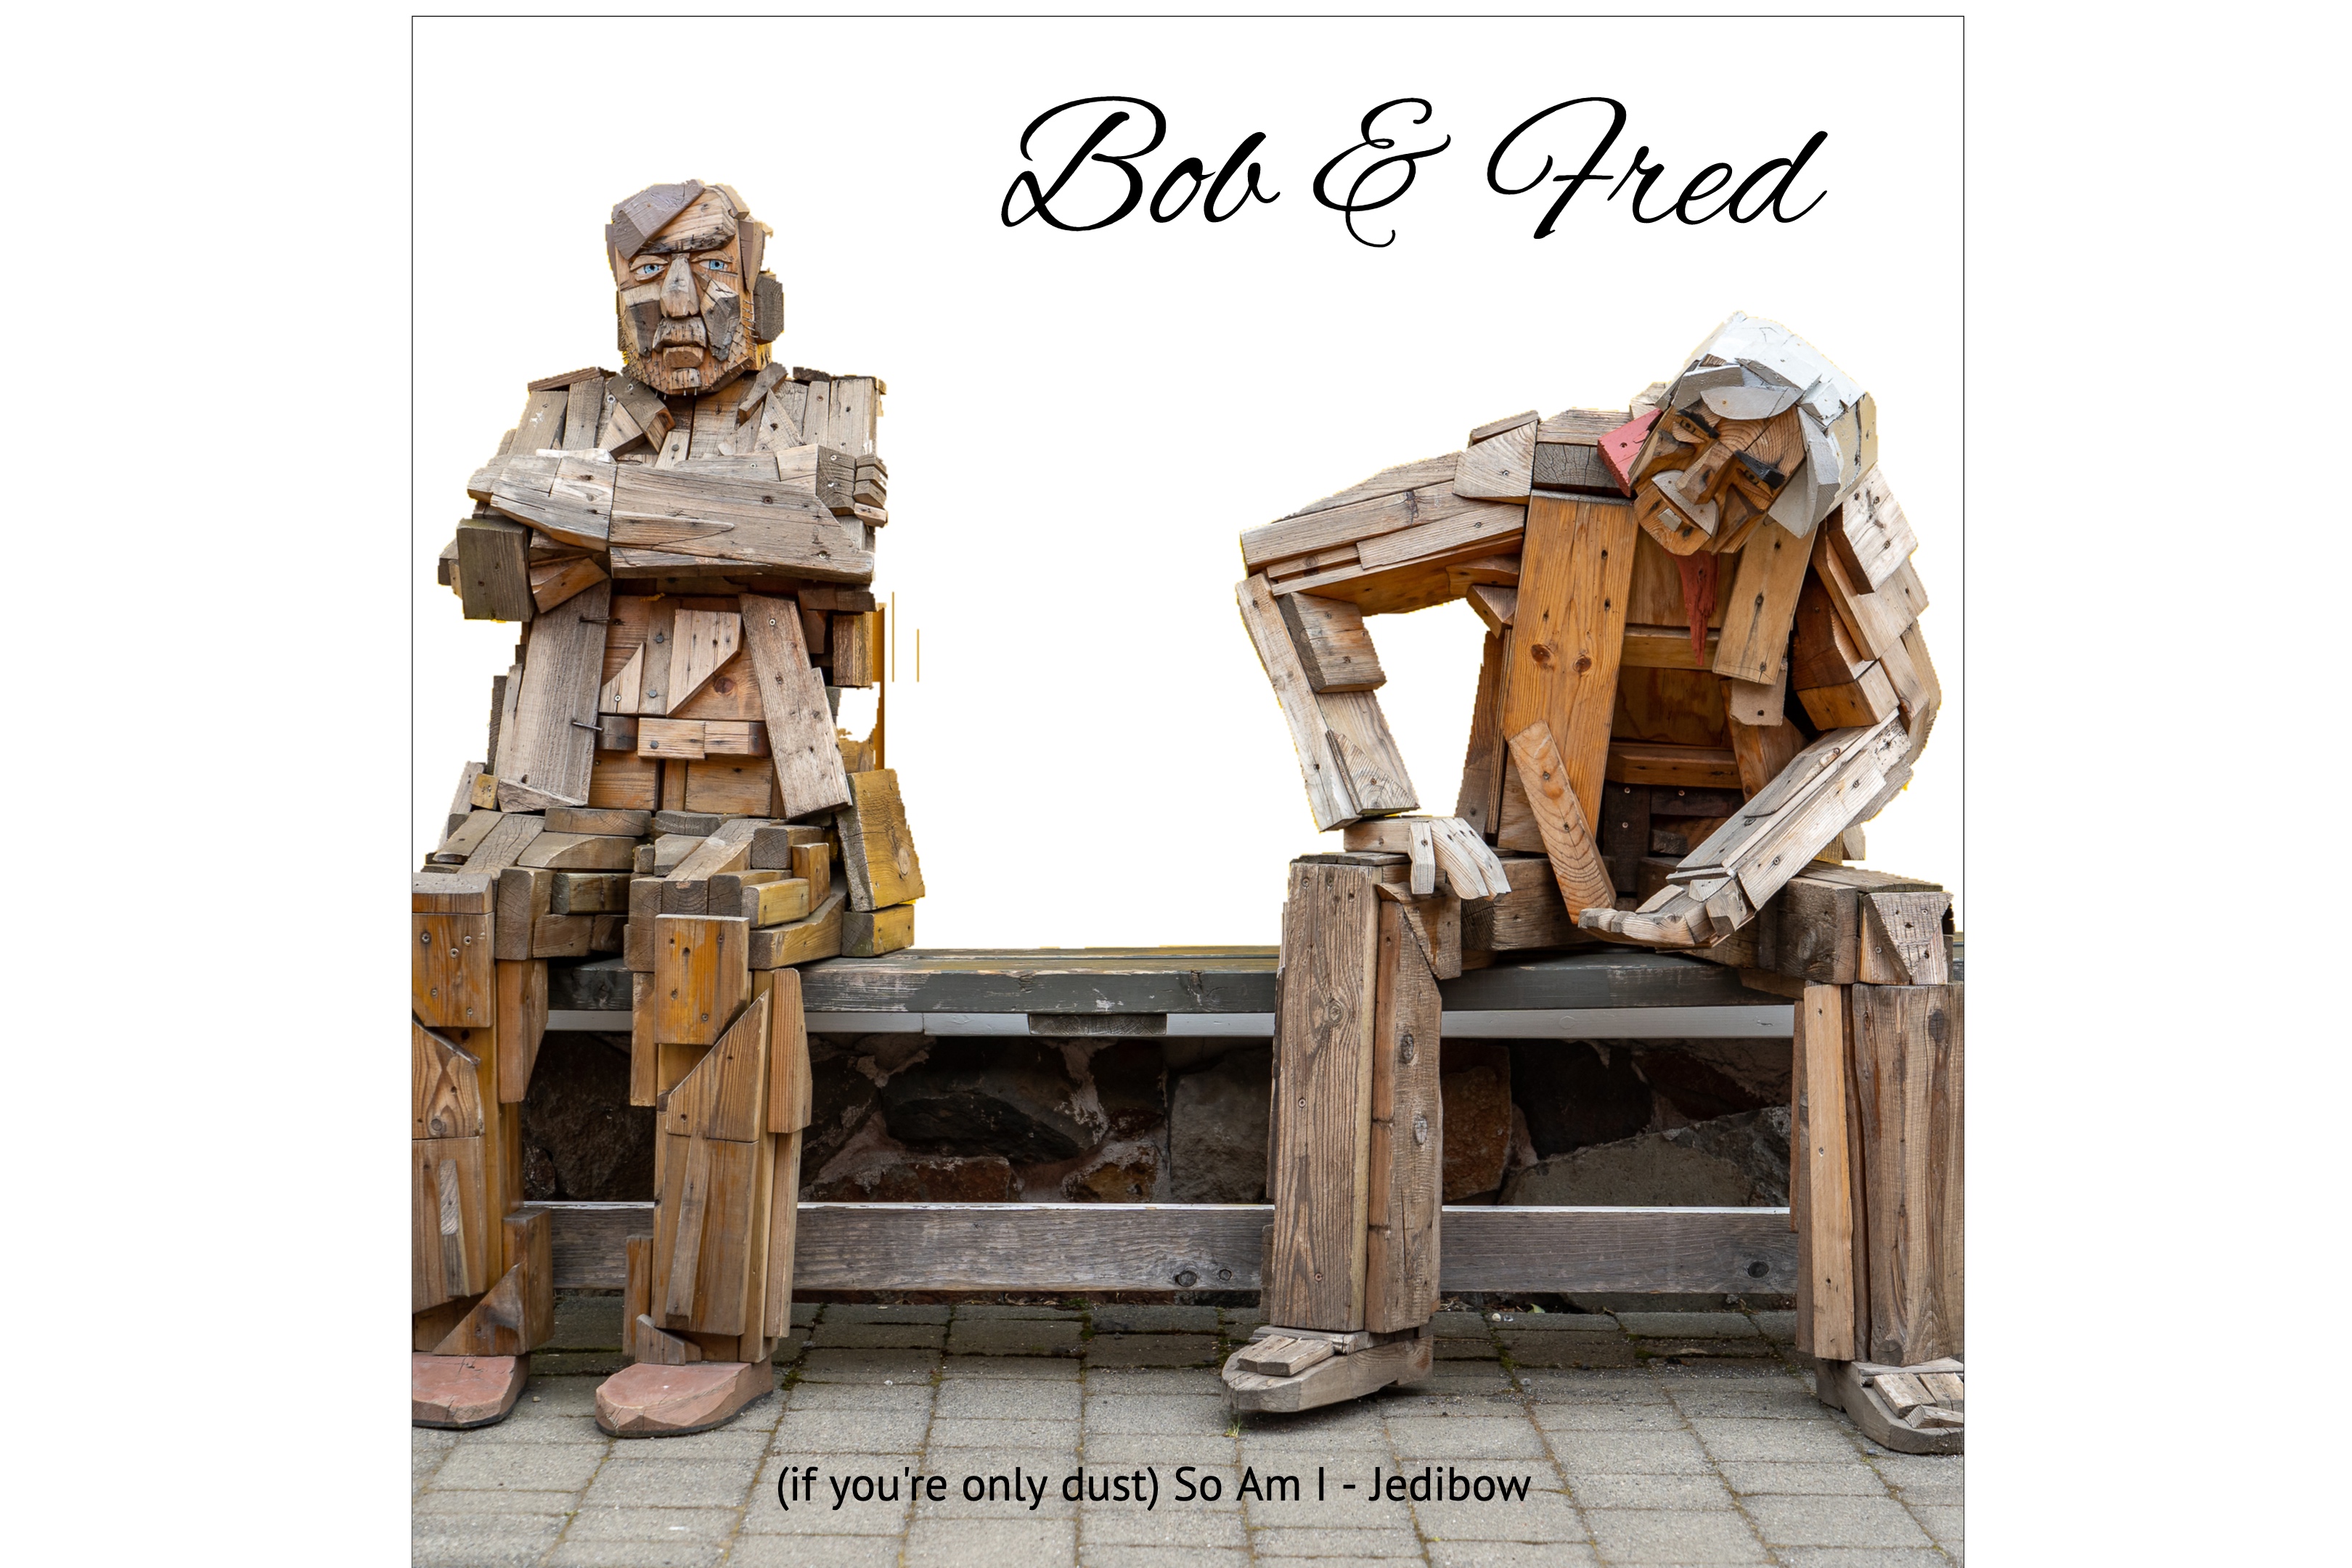 Bob & Fred come together to produce their latest musical offerings. Stifled by this global pandemic, there was nothing else to do but make stuff up.